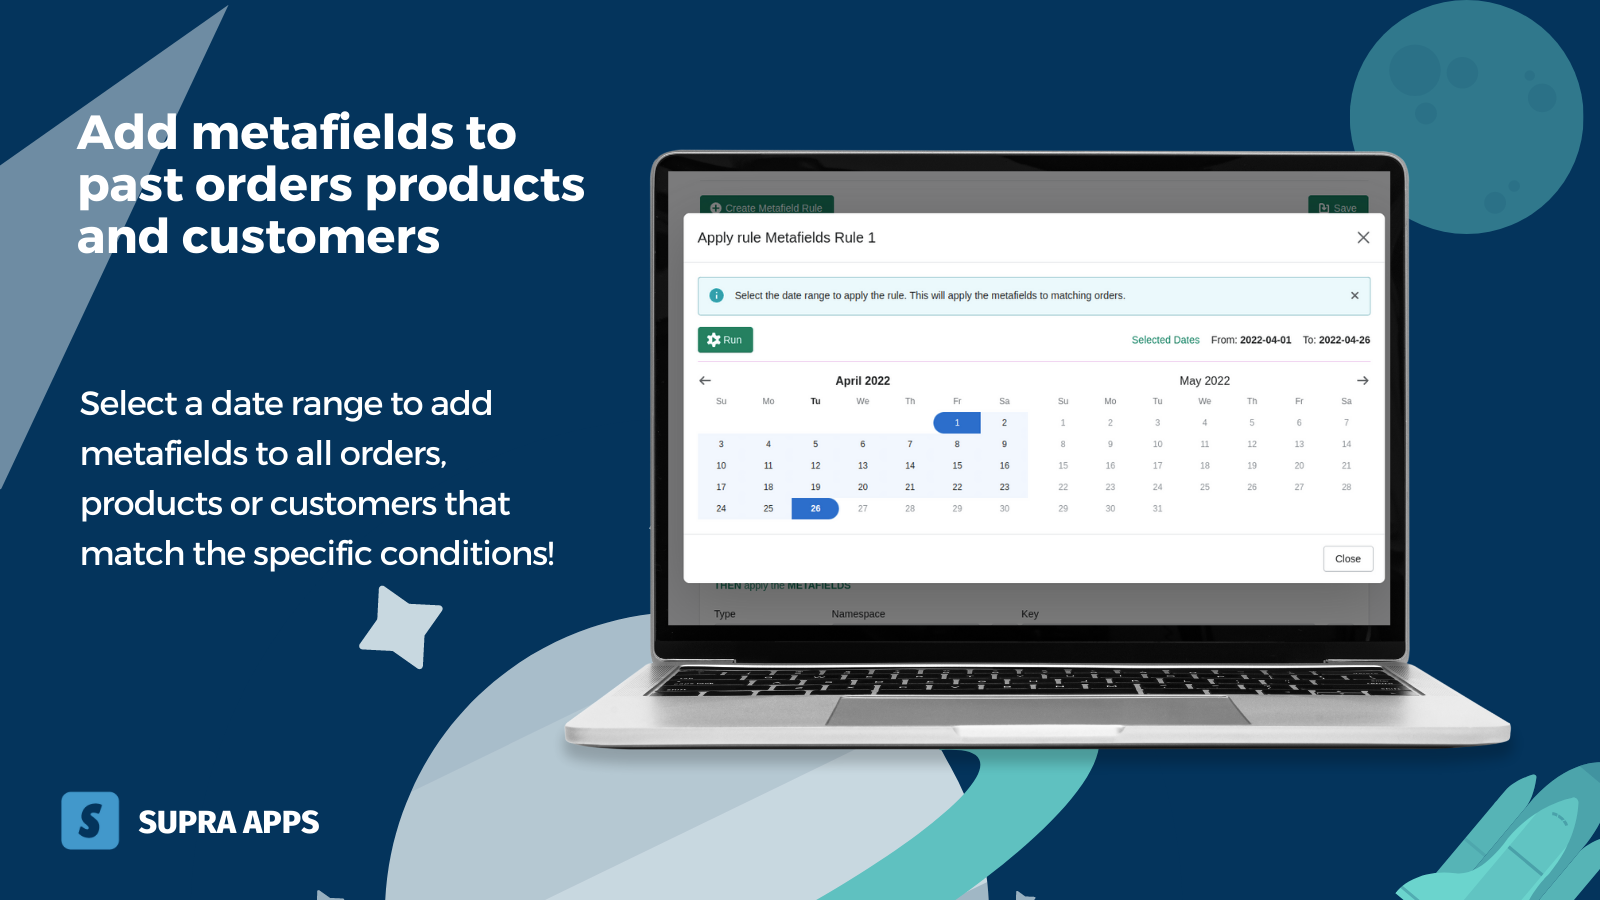 Add metafields for past orders, products and customers